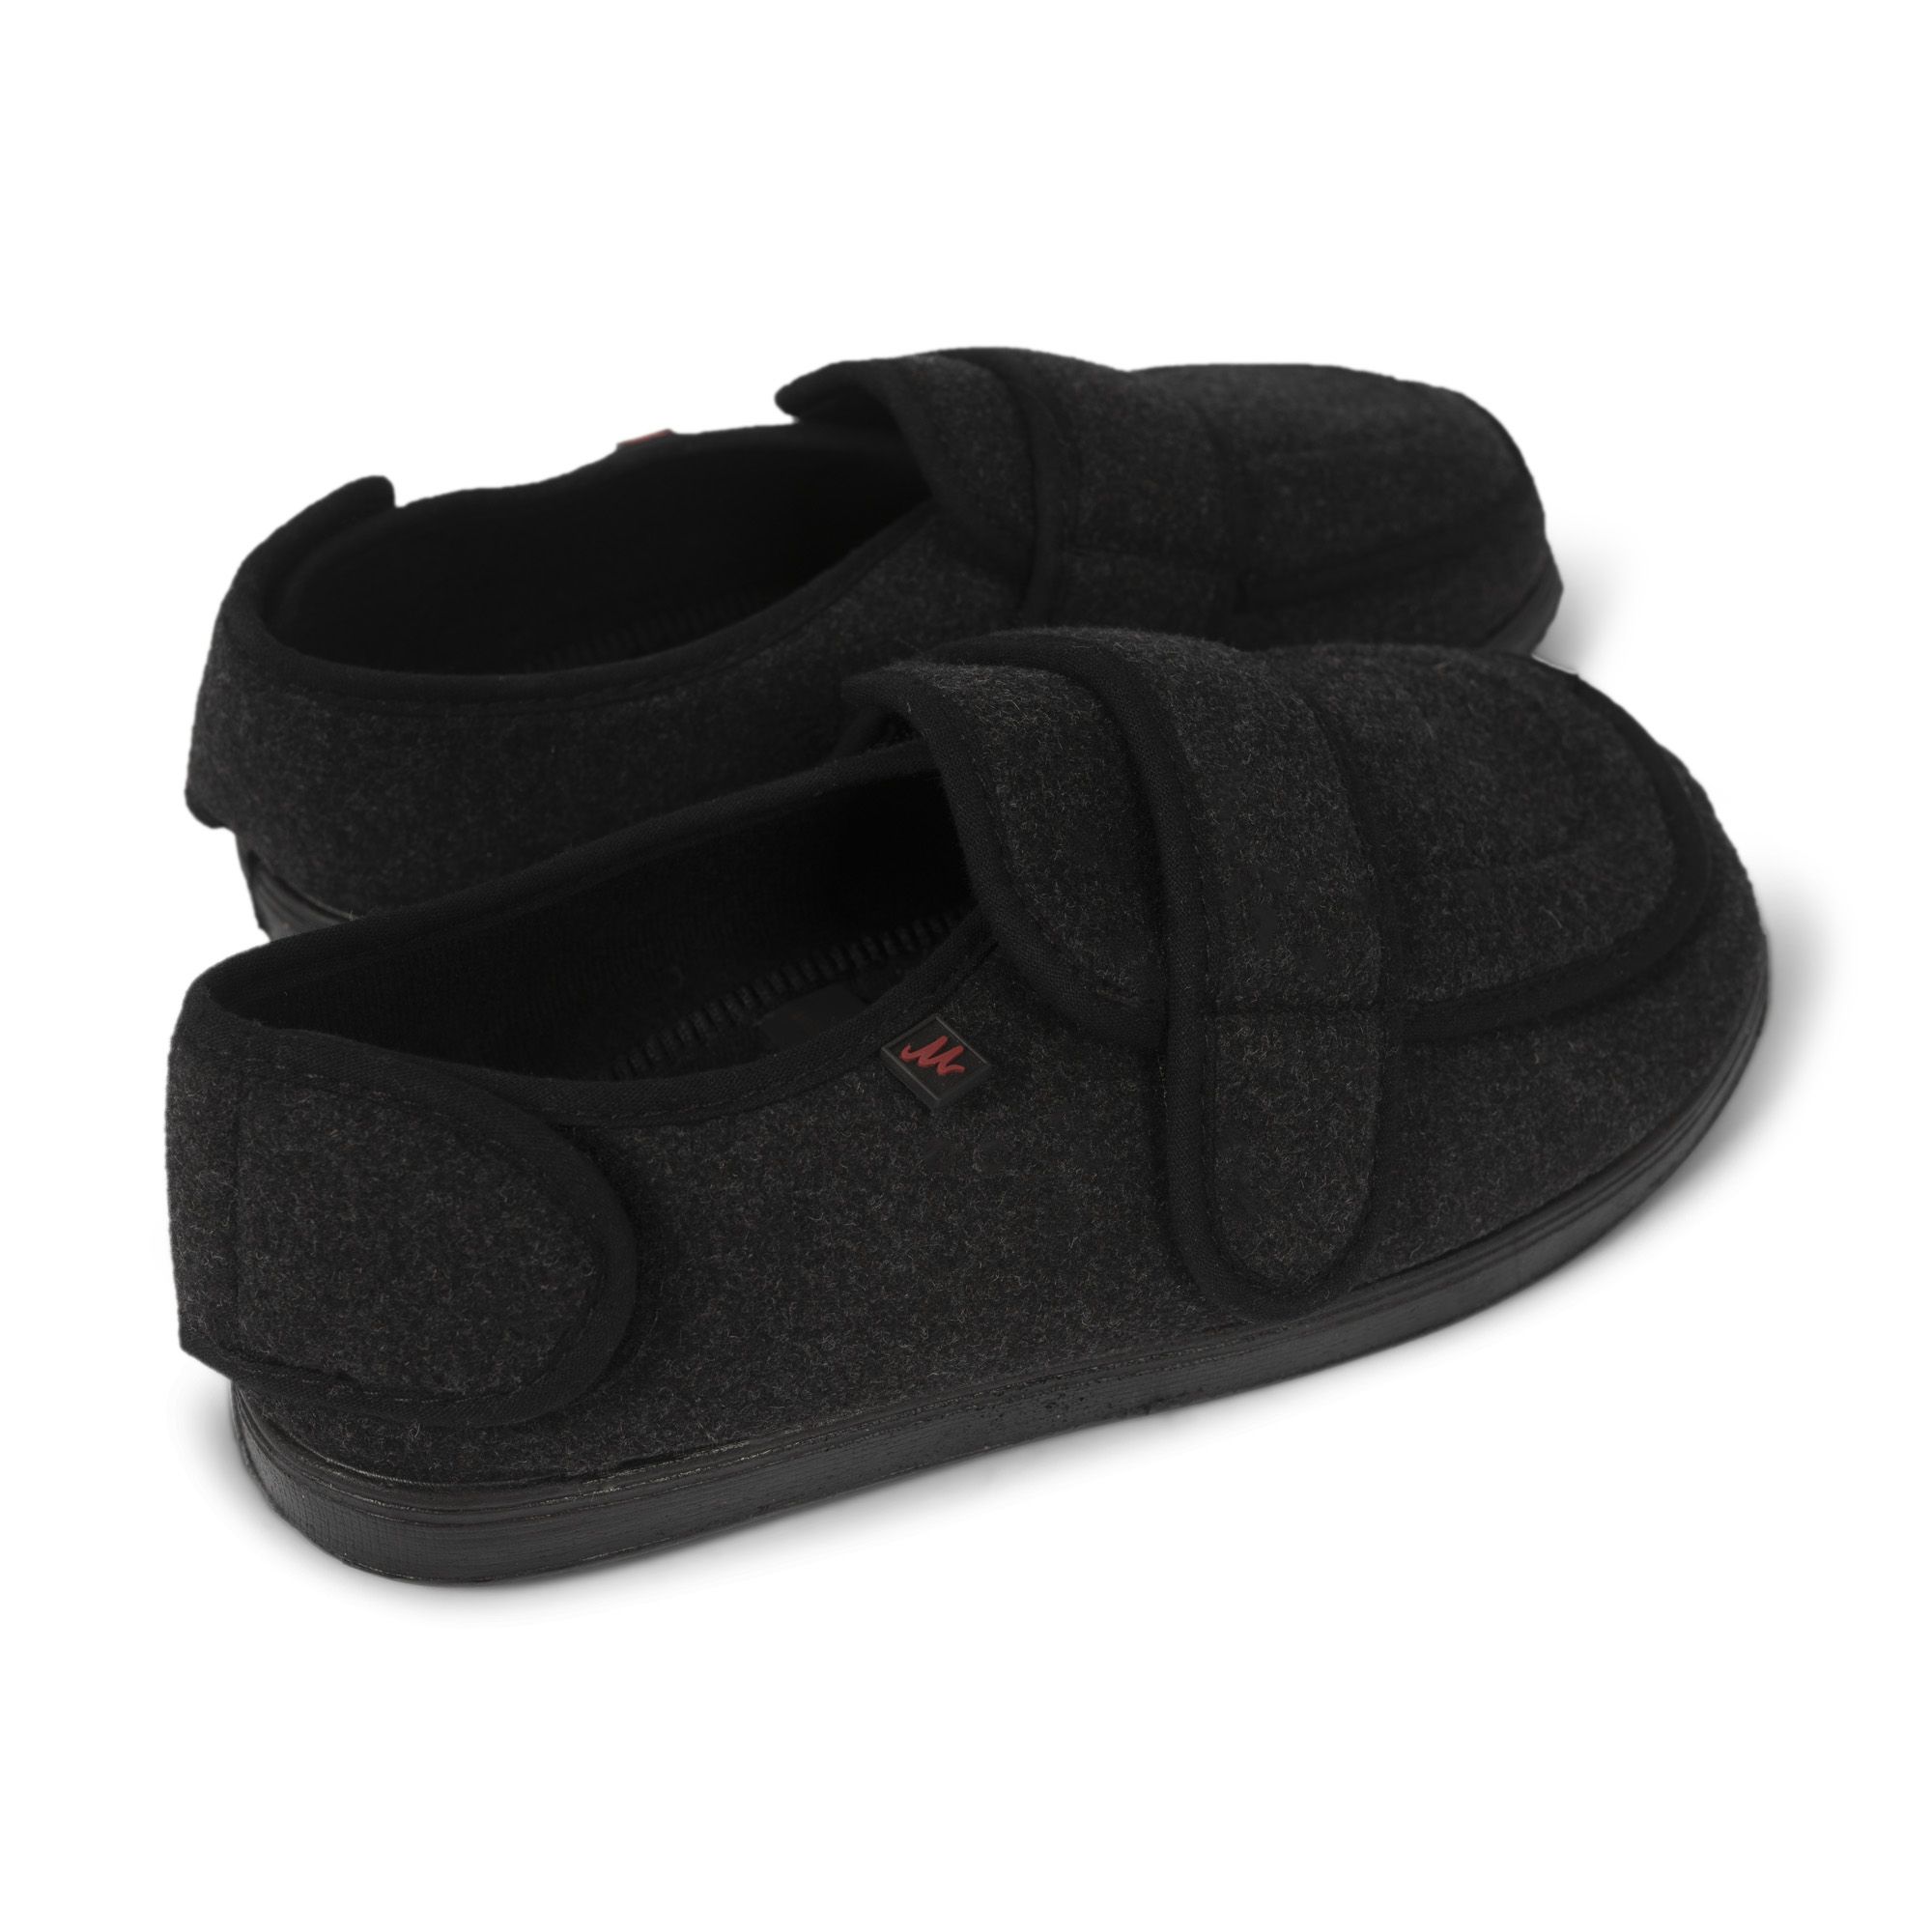 dunimed lesvago bandage shoes black pictured from the side